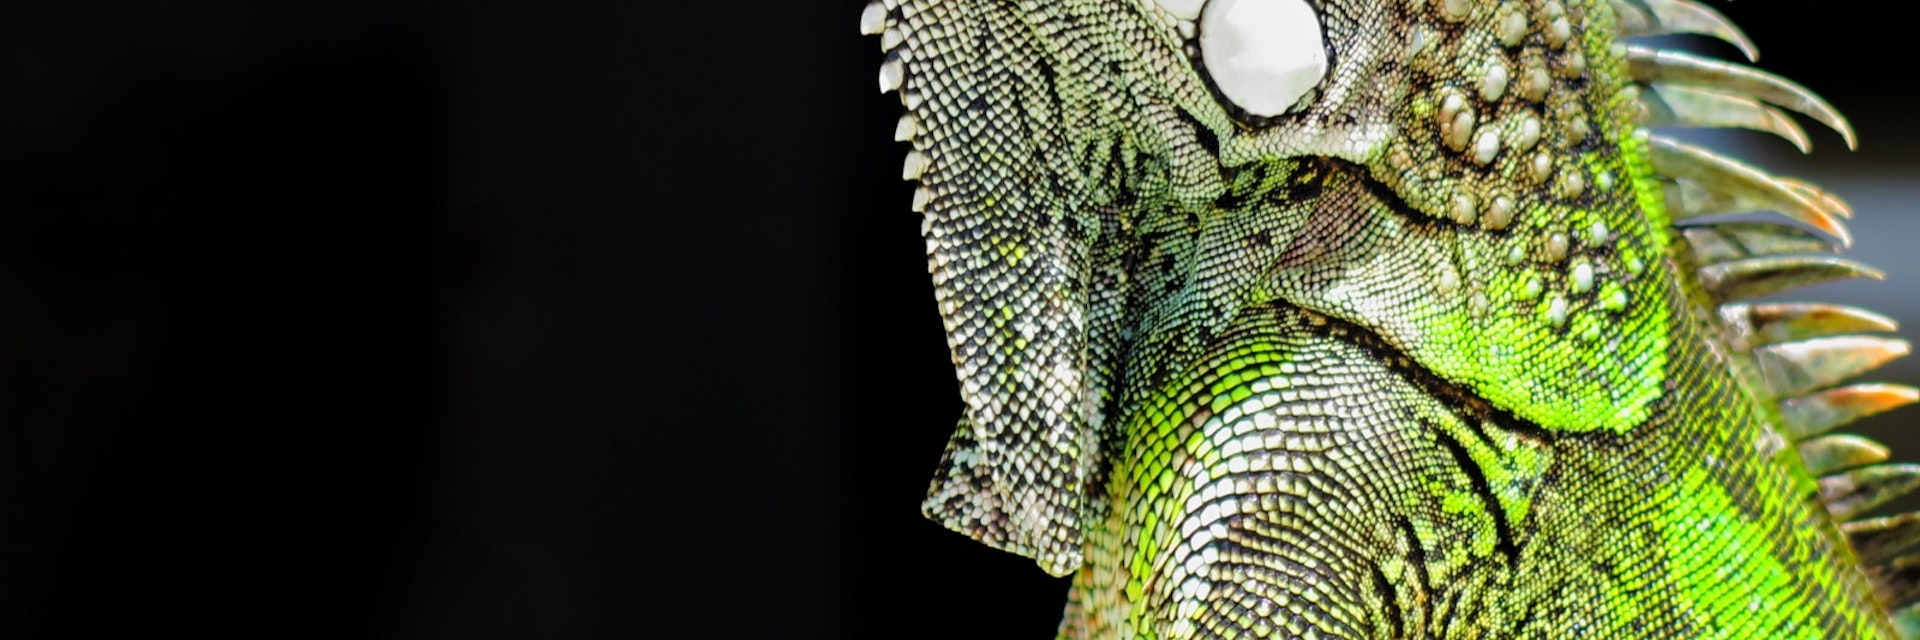 Green iguana profile detail with black background. Lizard's head close-up view. Small wild animal looks like a dragon. ; Shutterstock ID 616251773; Your name (First / Last): Alicia Johnson; GL account no.: 65050; Netsuite department name: Online Editorial ; Full Product or Project name including edition: Be